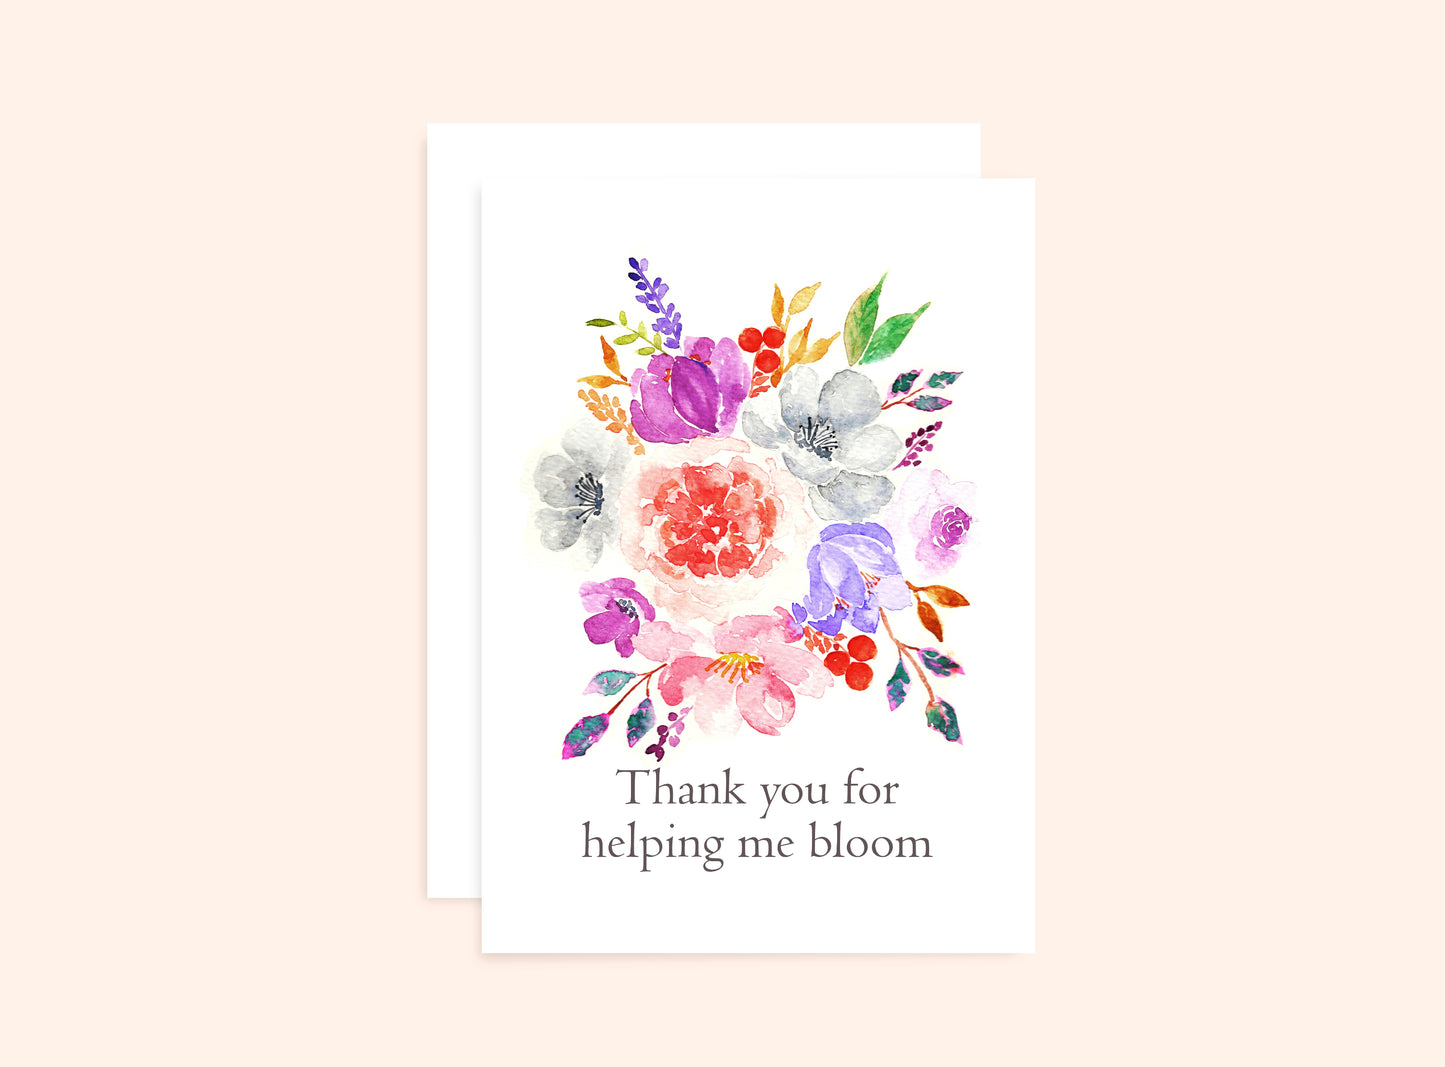 Thank You Card "Thank You for Helping Me Bloom"